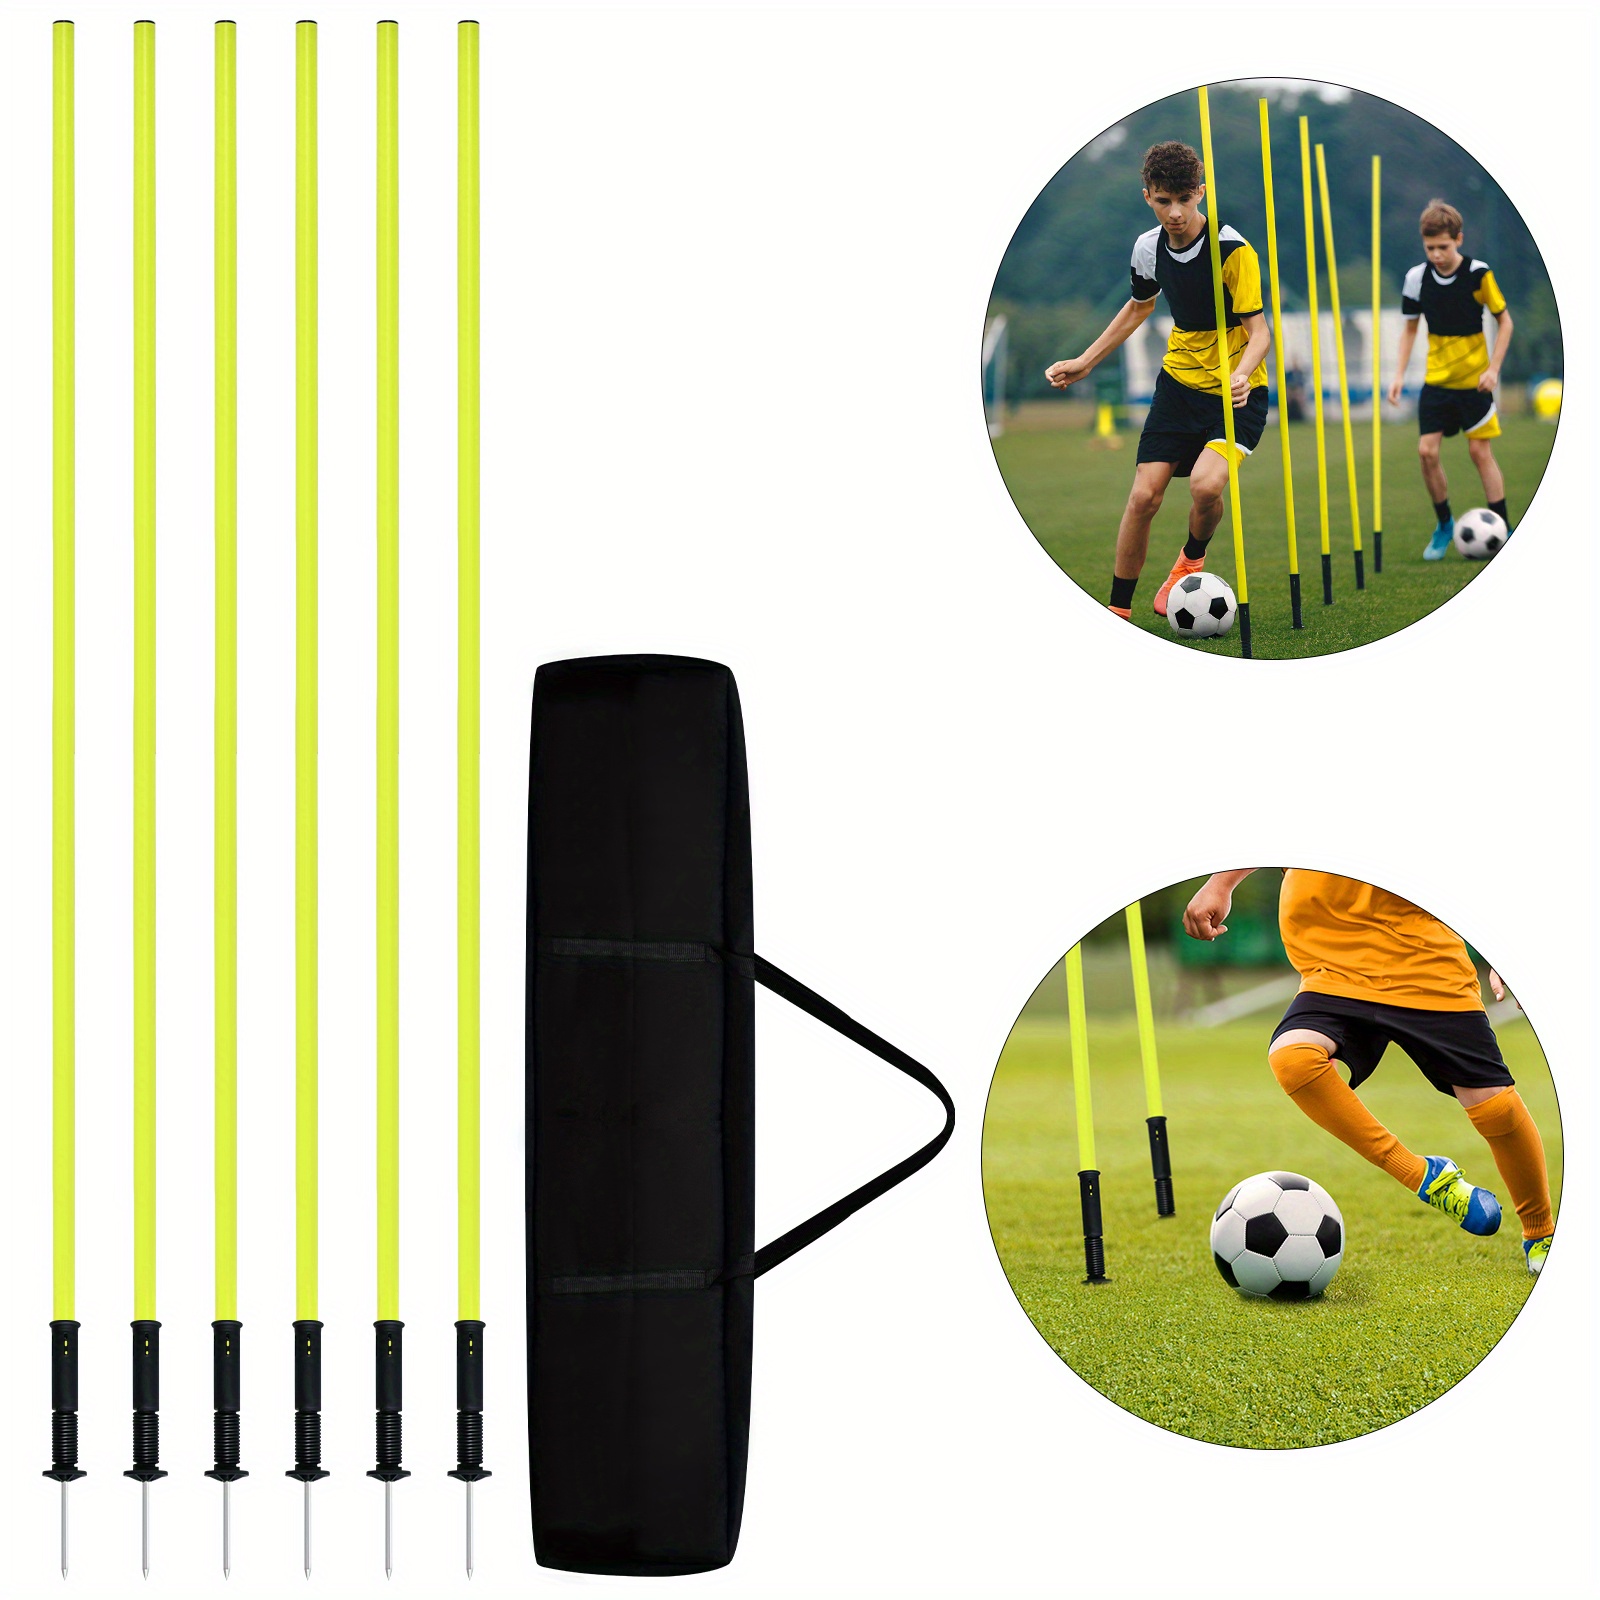 

Froadp Set Of 6 Slalom Poles - 1.5 M/59.05in Slalom Poles With 10 Cm/3.93in Long Metal Tip And Carry Bag, Jumping Agility Bars Hurdle Bars For Football Training Goal Marking Slalom Training